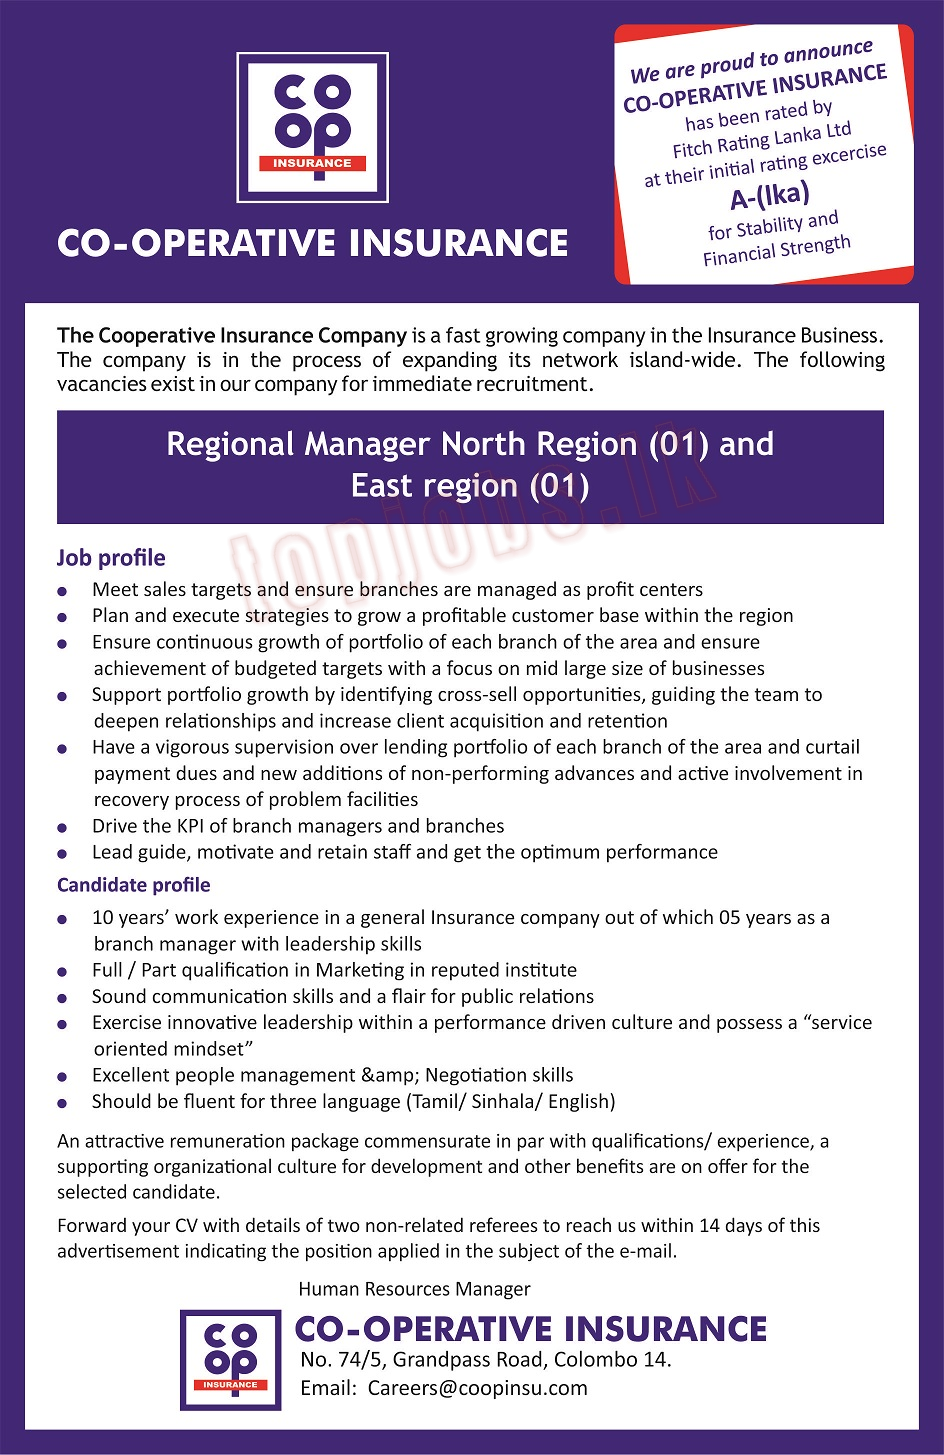 Regional Managers Northern / Eastern Province Co-operative Insurance